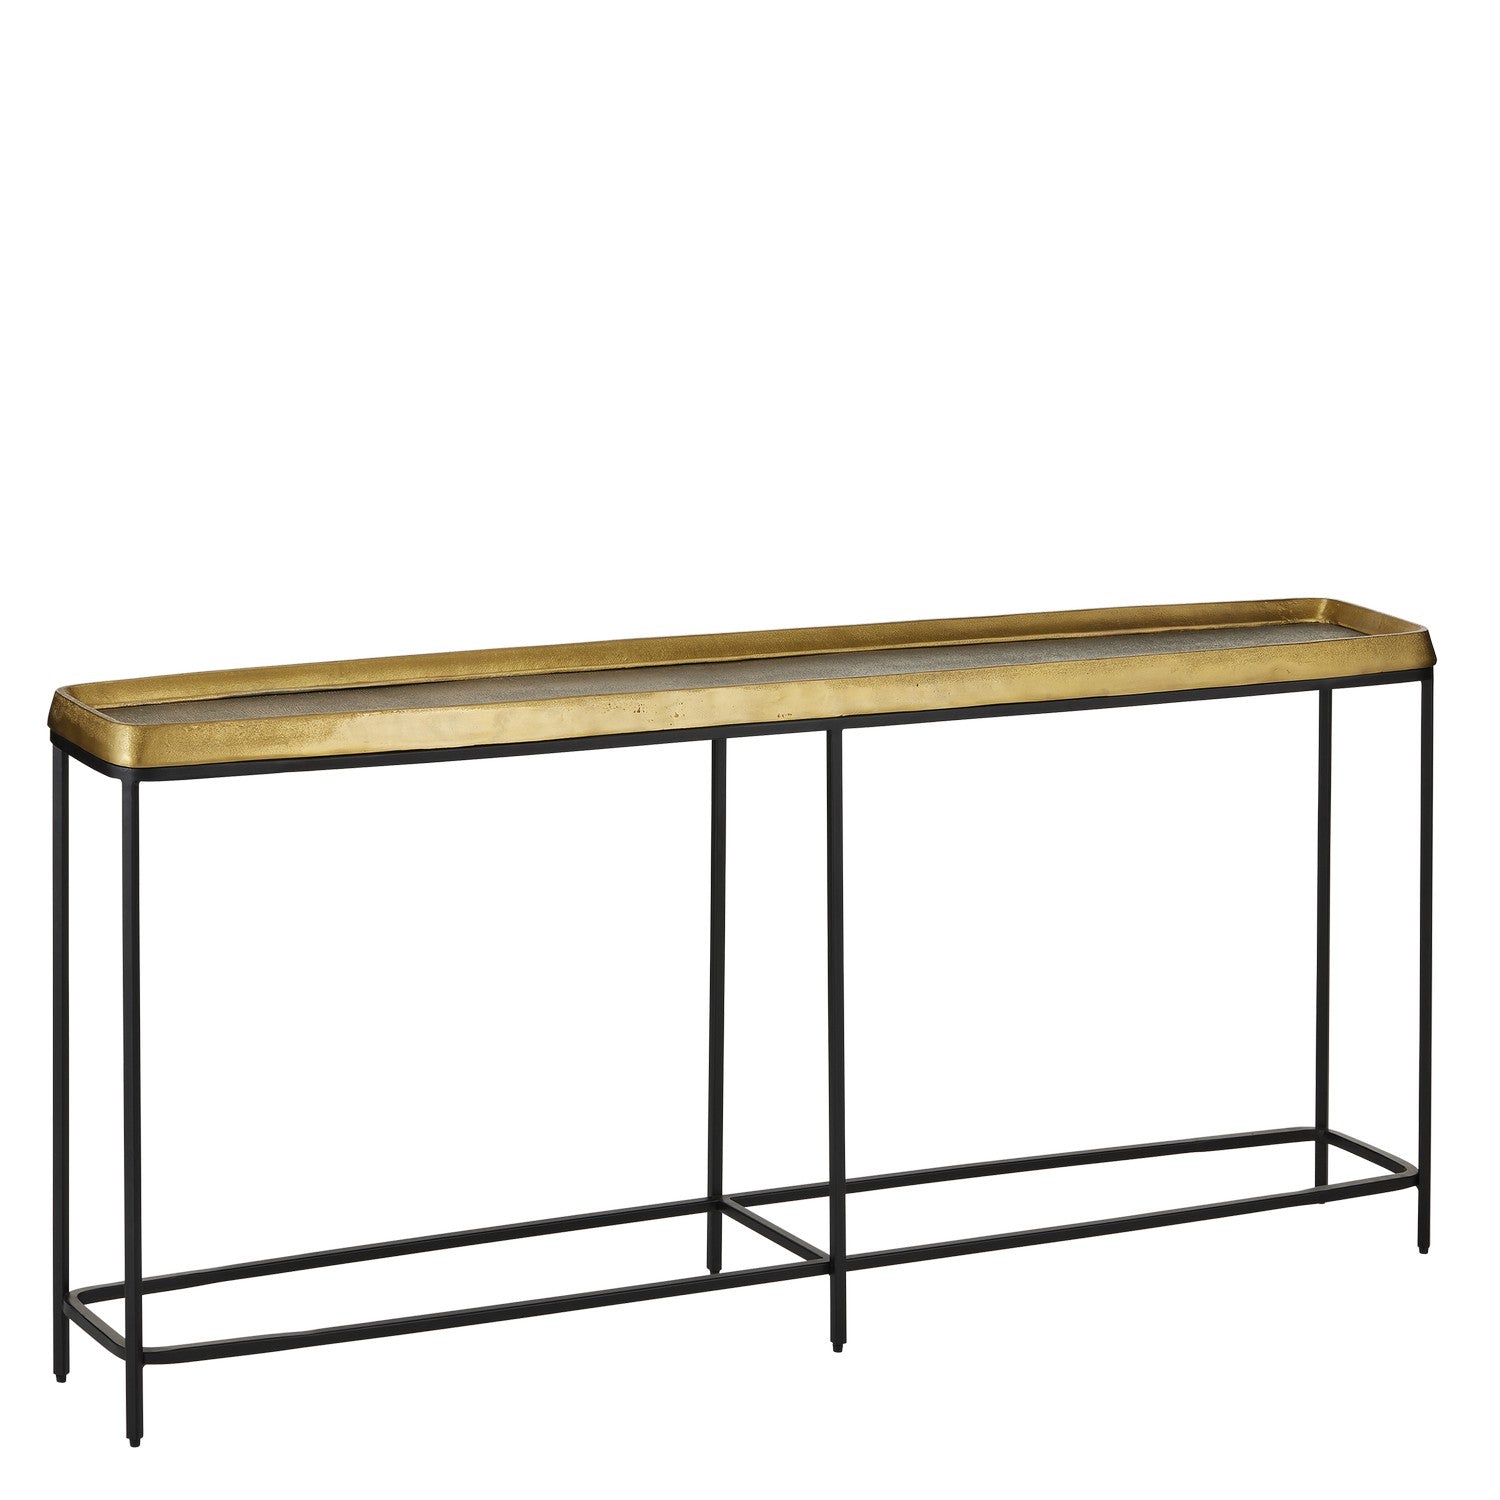 Currey and Company - 4000-0150 - Console Table - Antique Brass/Graphite/Black